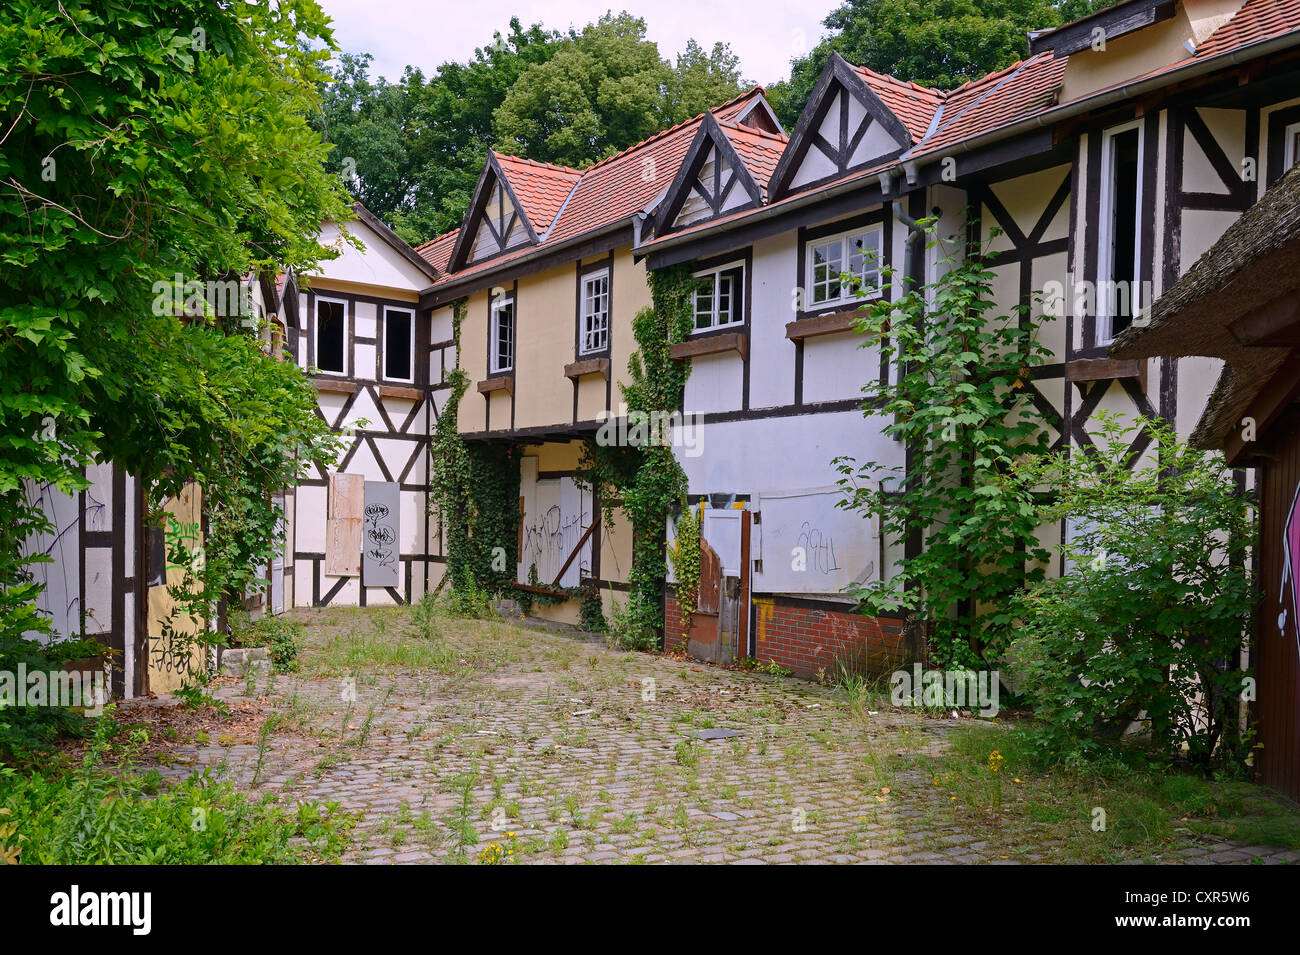 Half-timbered houses, location of national and international film and television productions, in the former Spreepark Berlin Stock Photo